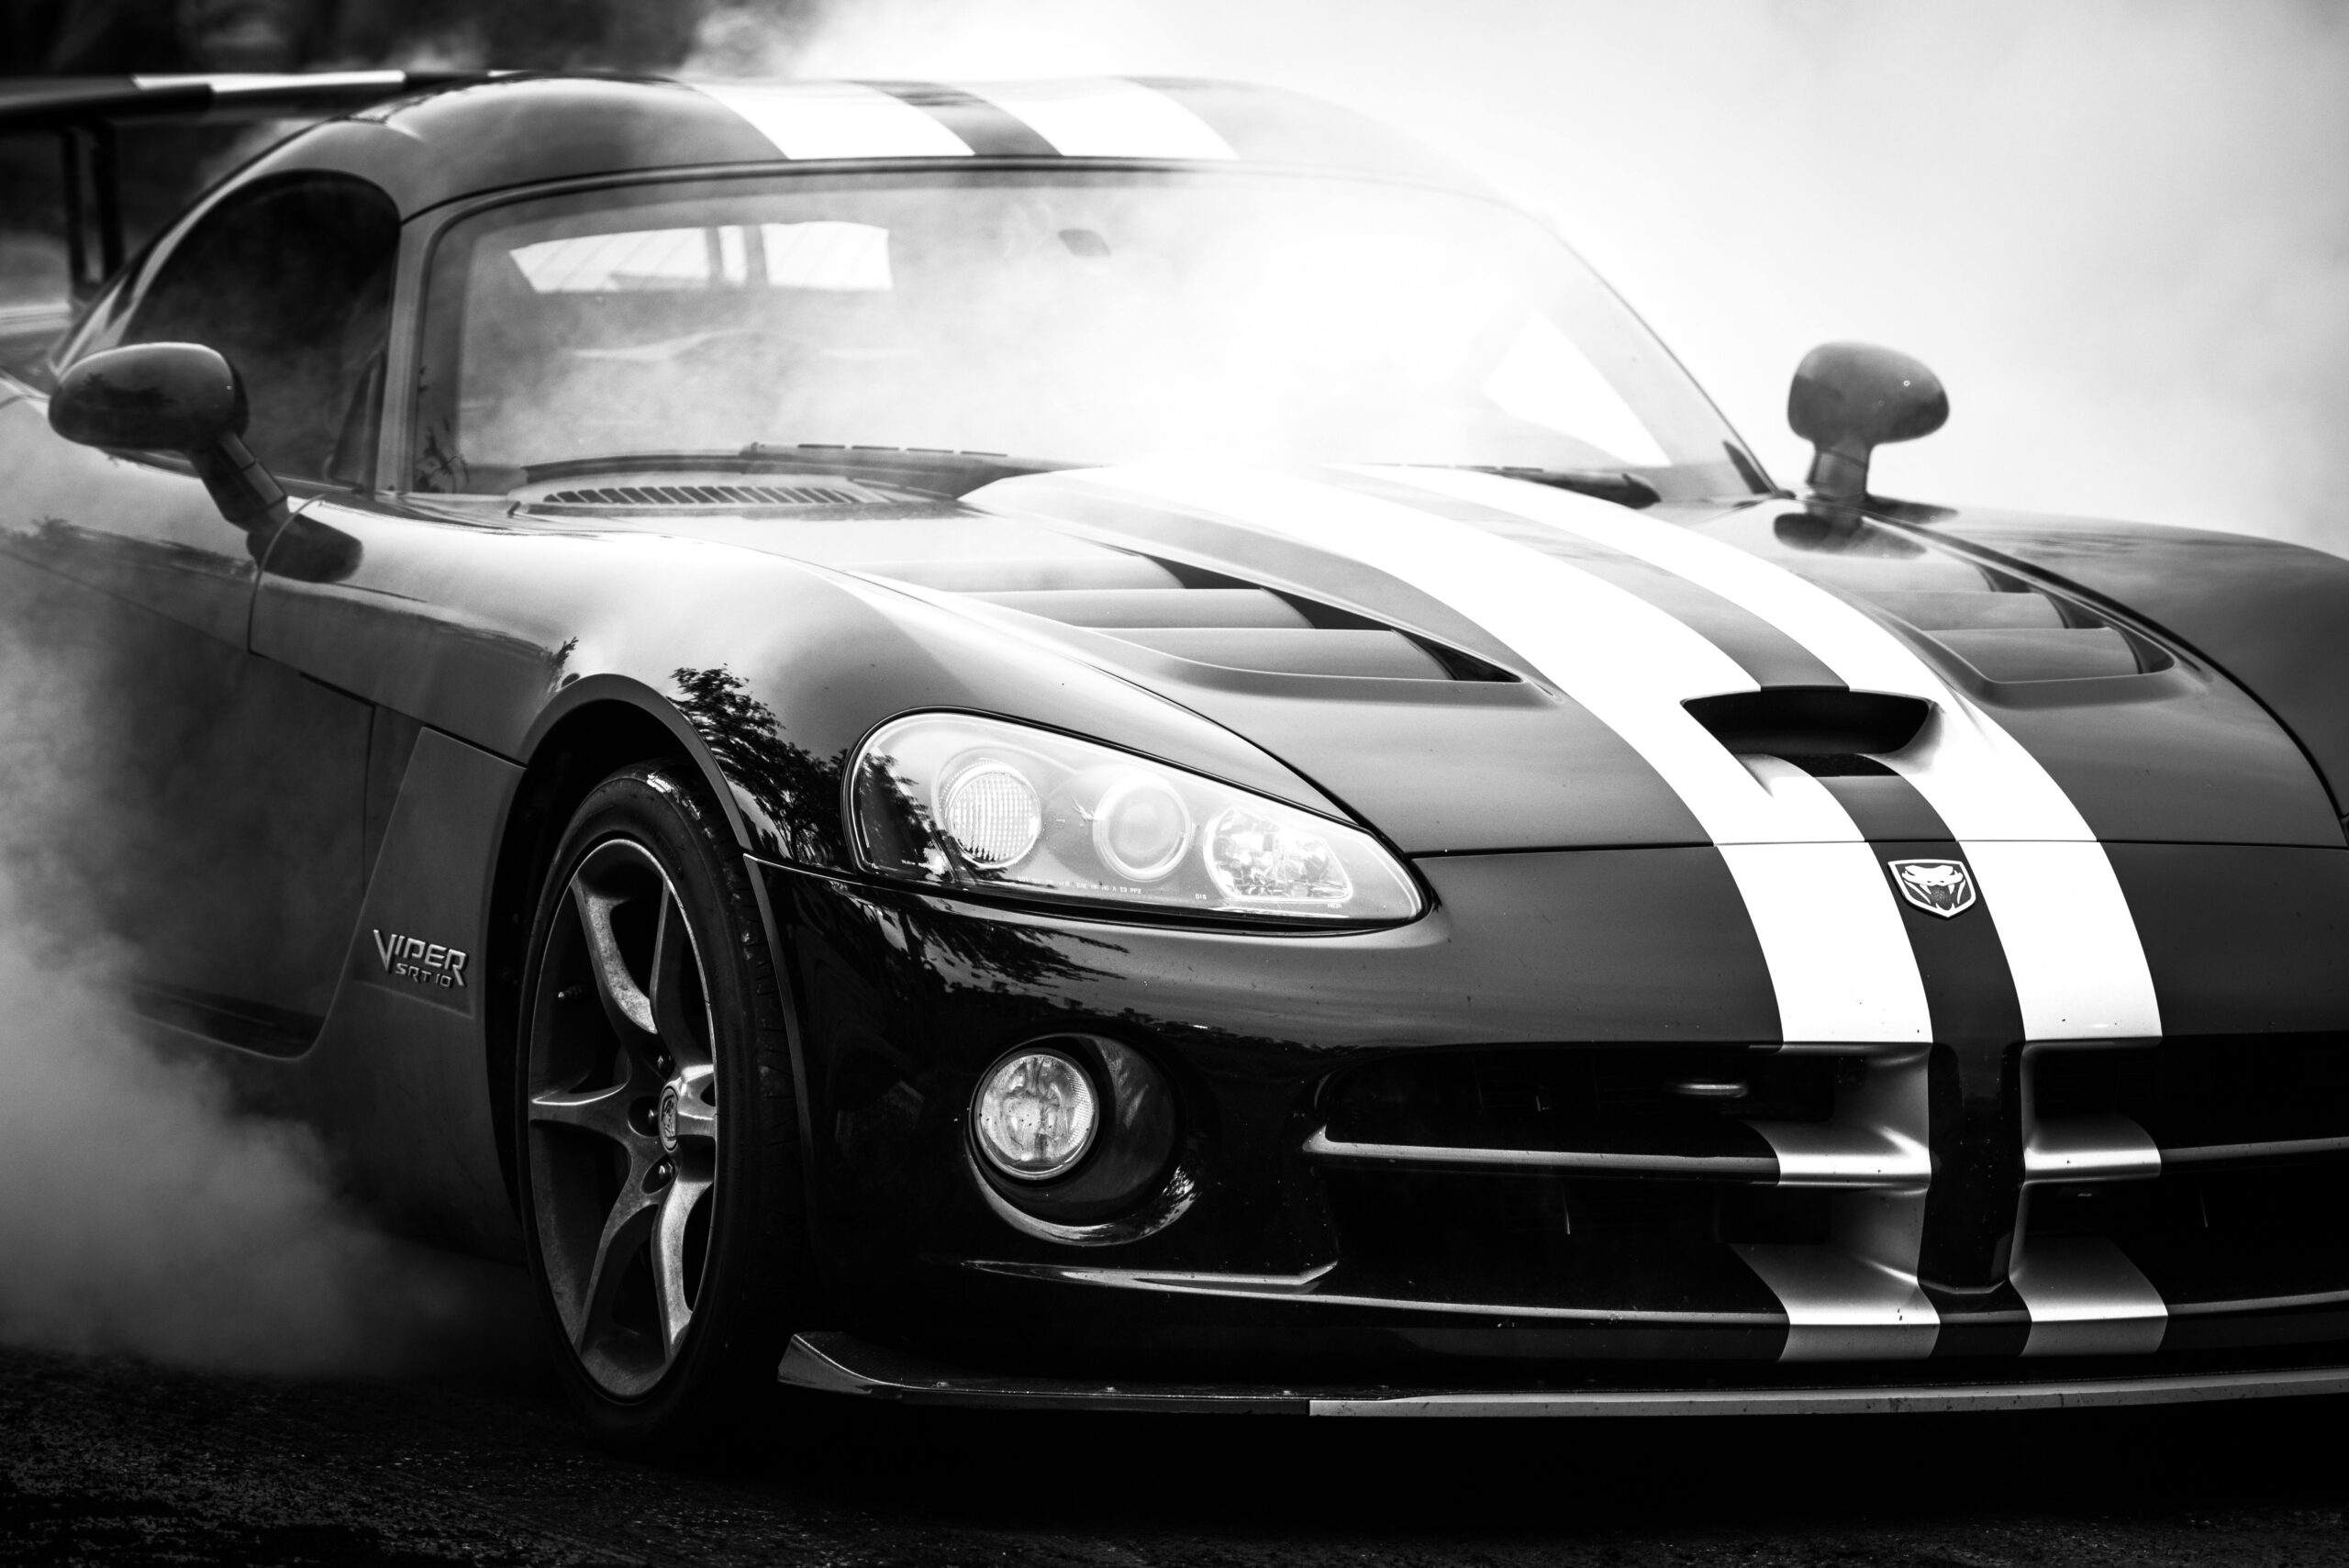 The Beast: A Tribute to the Dodge Viper